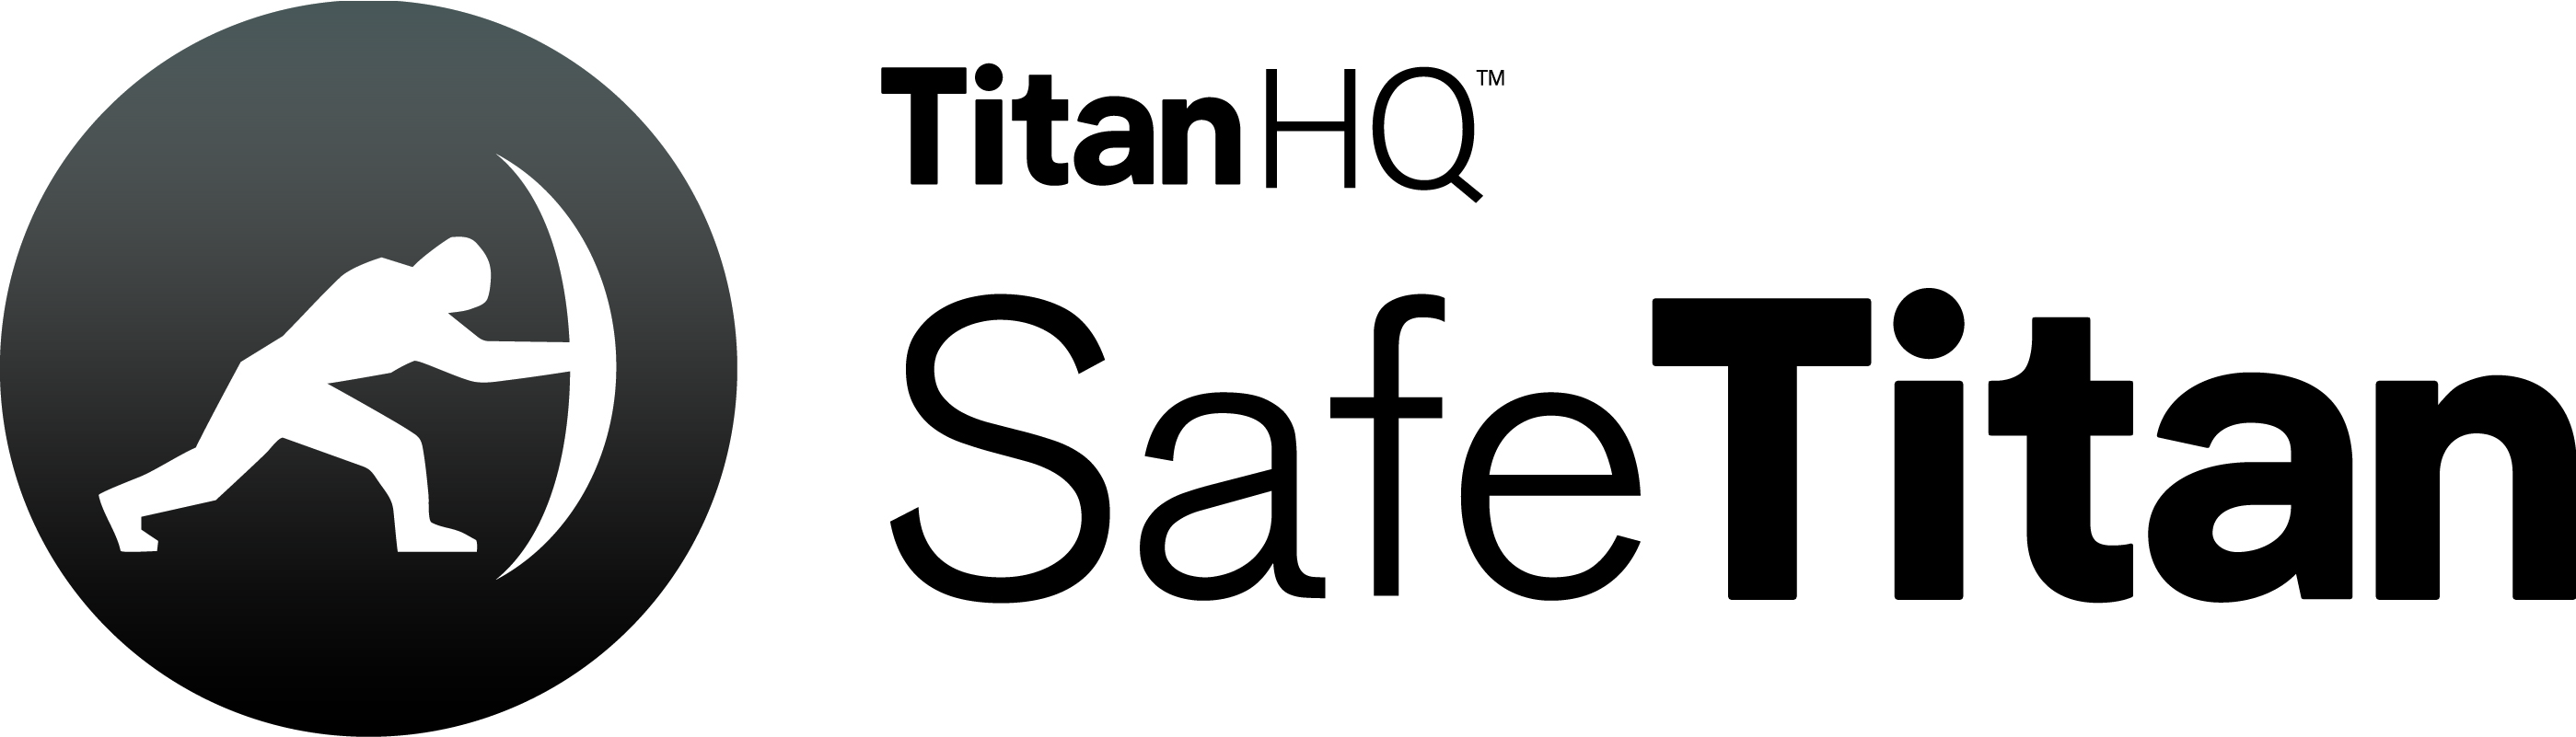 TitanHQ Launches SafeTitan Security Awareness Training for MSPs